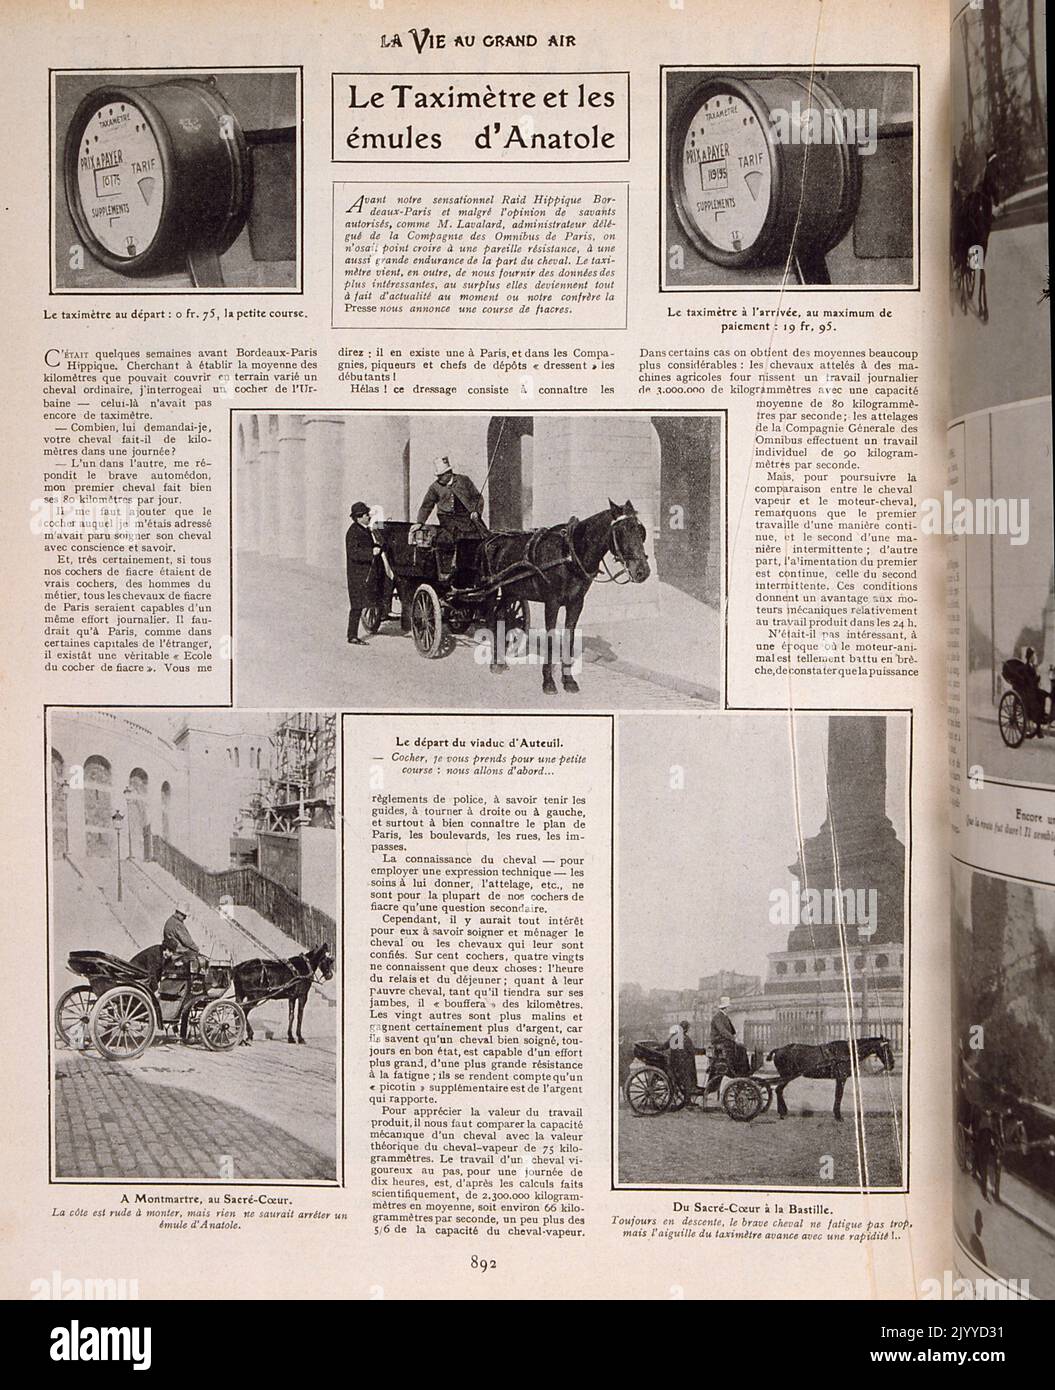 From the magazine La Vie au Grand Air (Life in the Outdoors); Black and white photographs of early taxis showing the meter attached to the wheels of the carriage drawn by horse Stock Photo